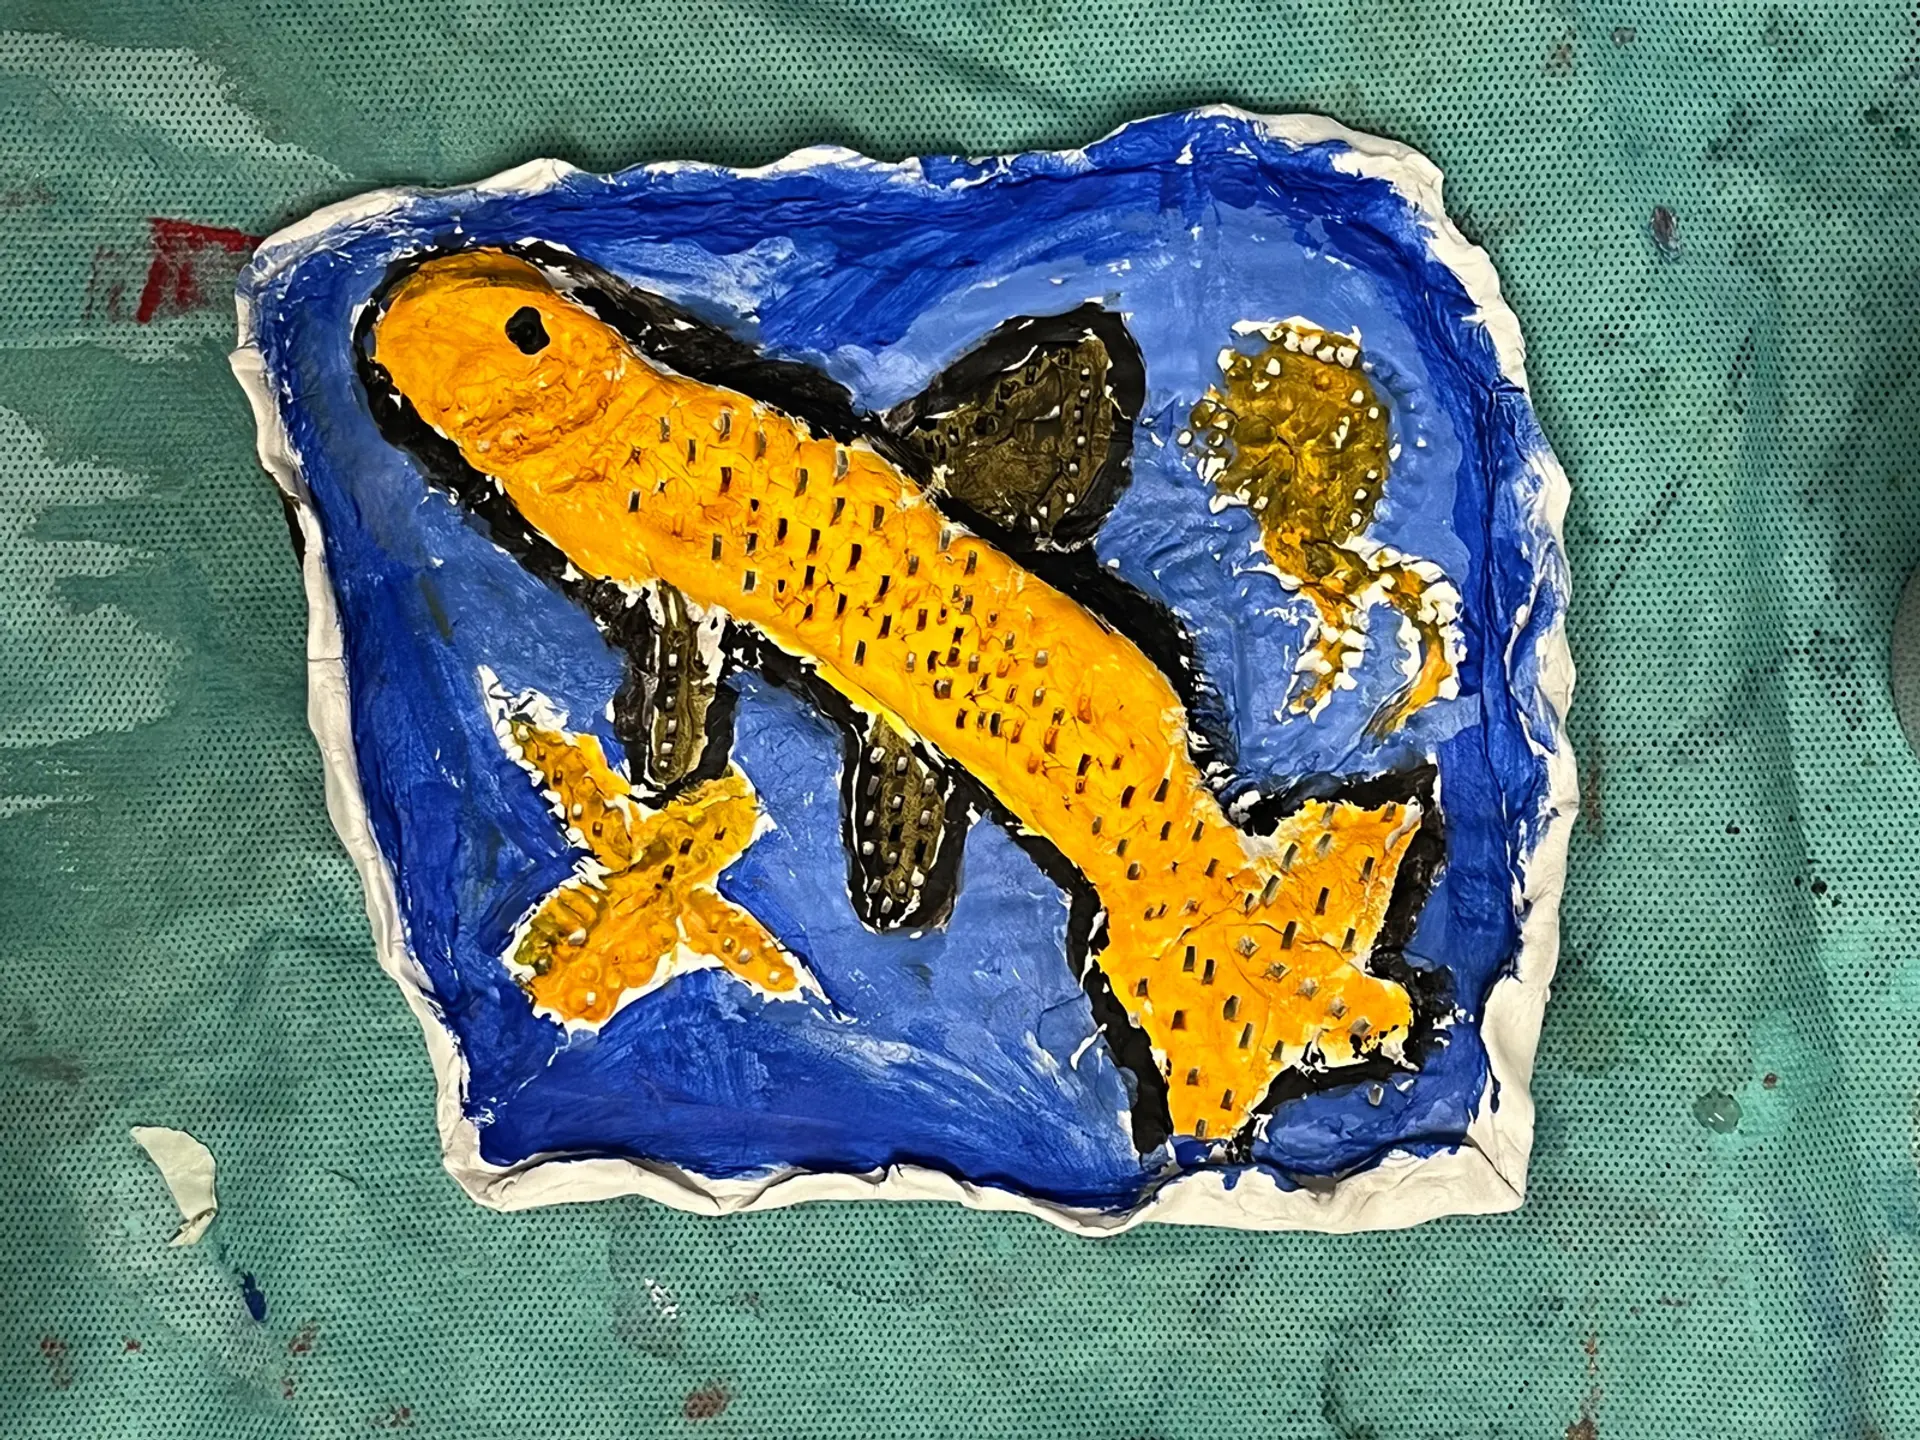 A rectangular tile made from air dried clay, on the tile is a yellow fish with  a blue background and two starfish.